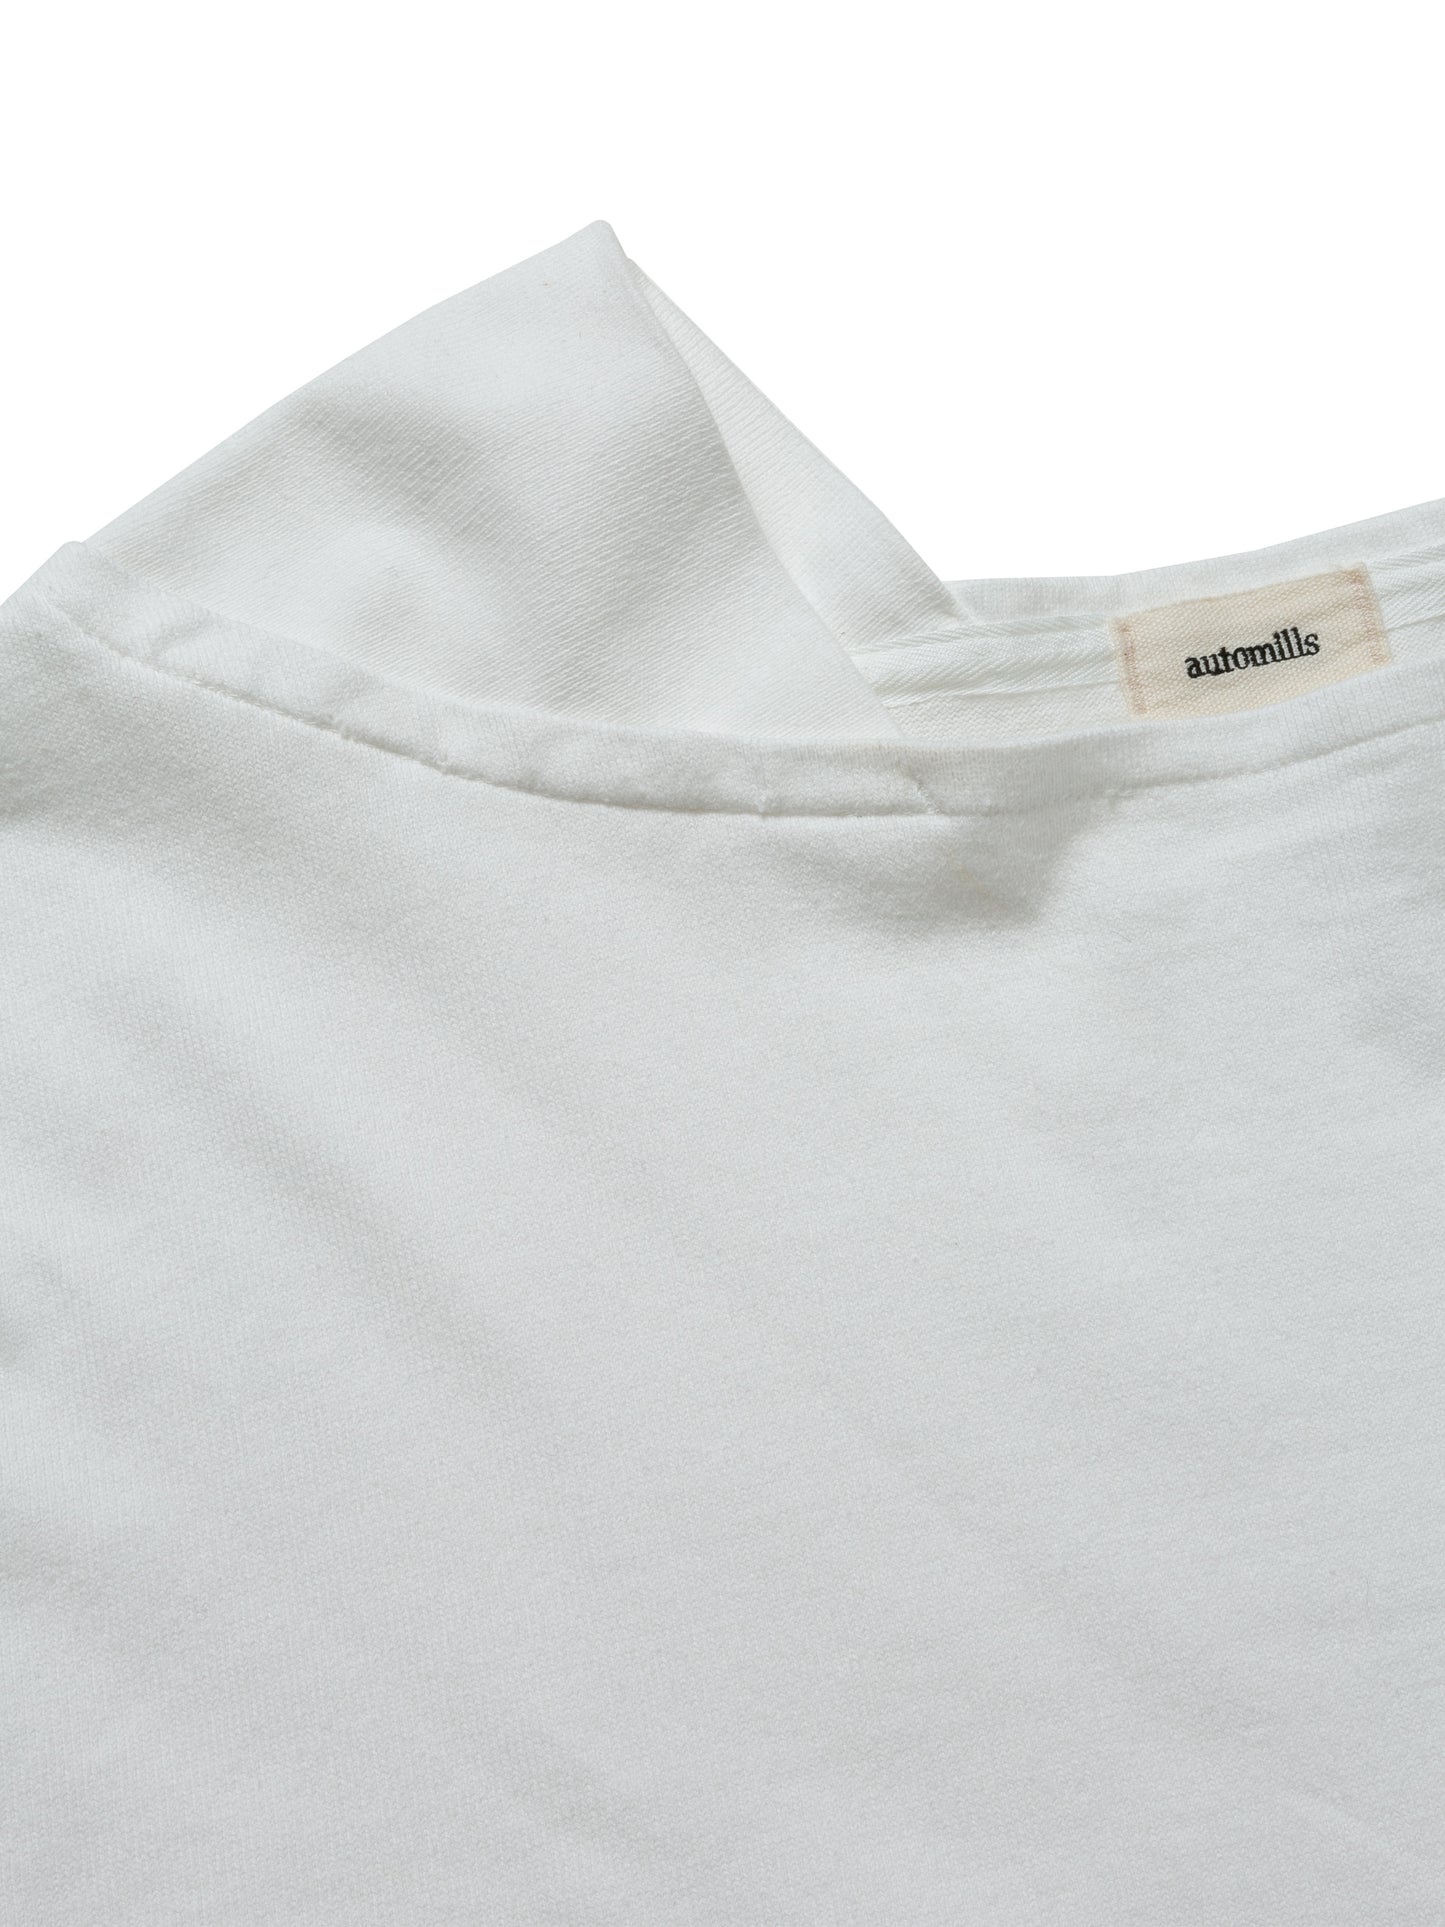 BAGGY BOAT L/S TEE COTTON JERSEY AM-C0107 White